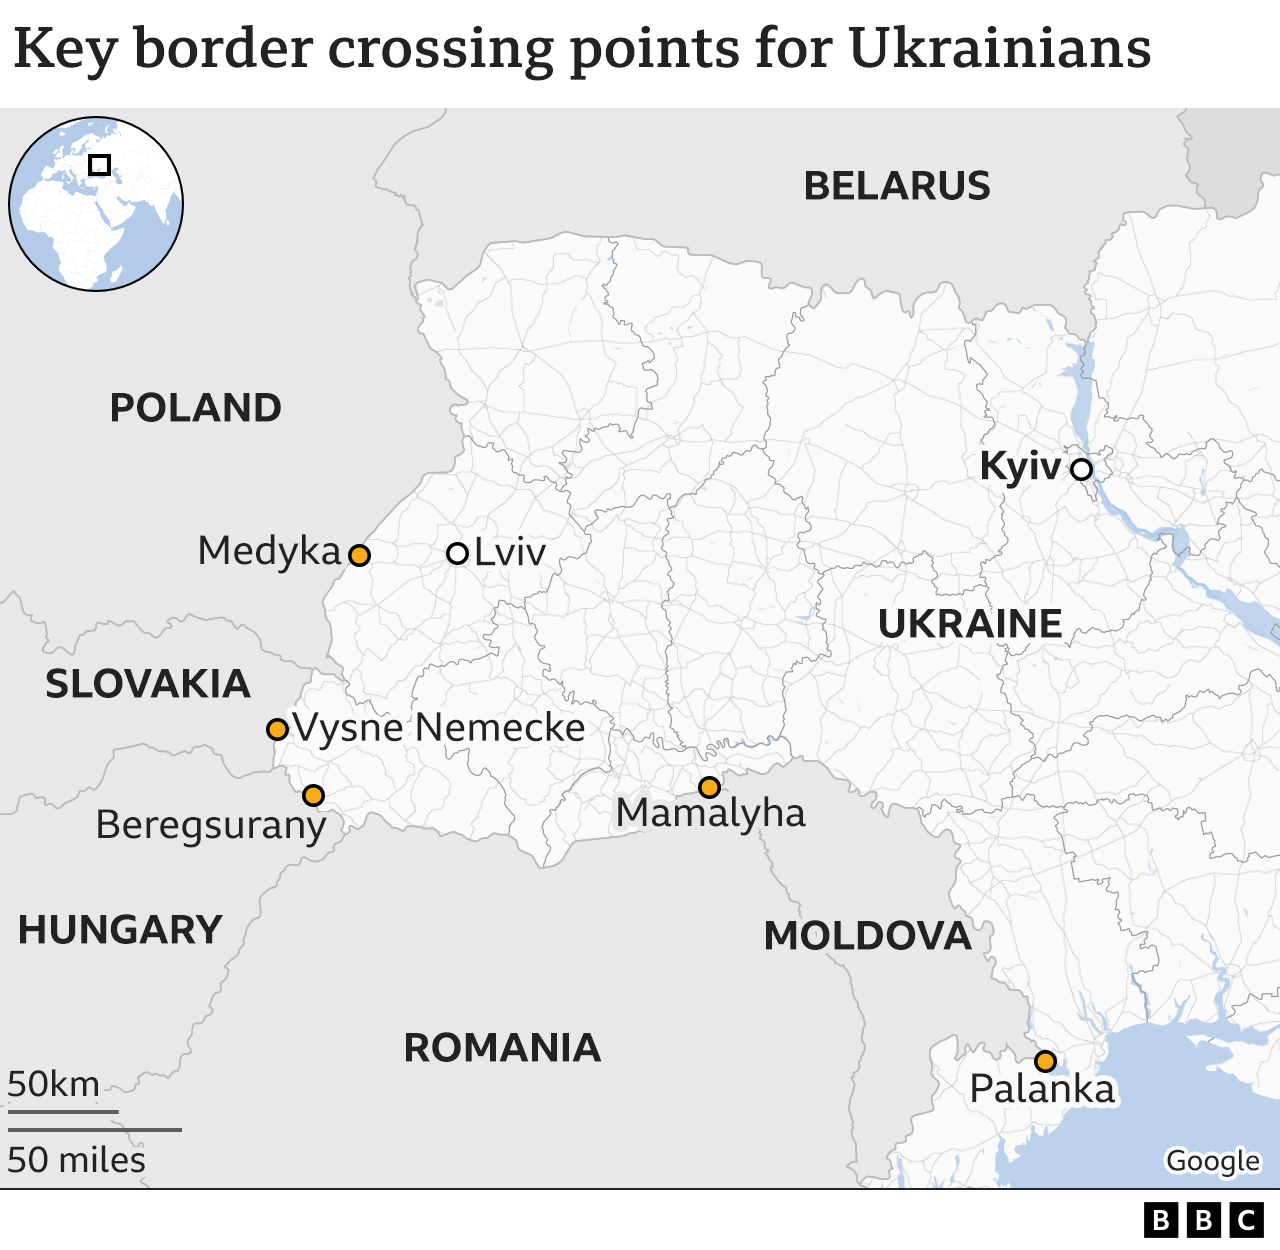 Graphic showing key crossing points for Ukrainians